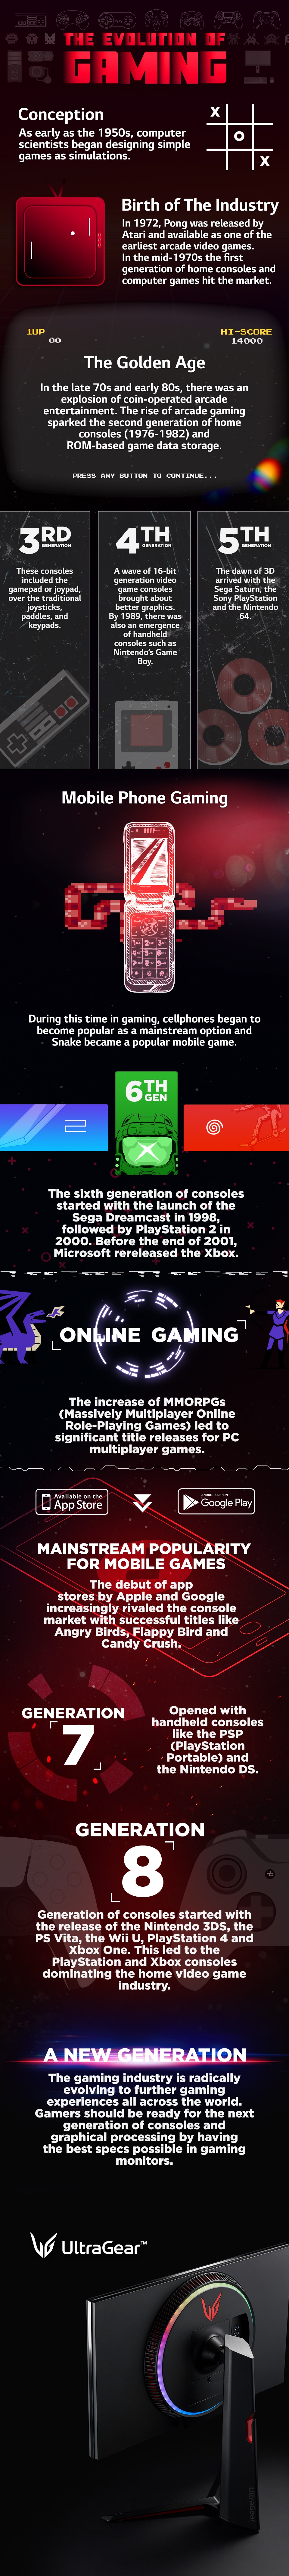 A Brief History of Gaming & The Gaming Industry